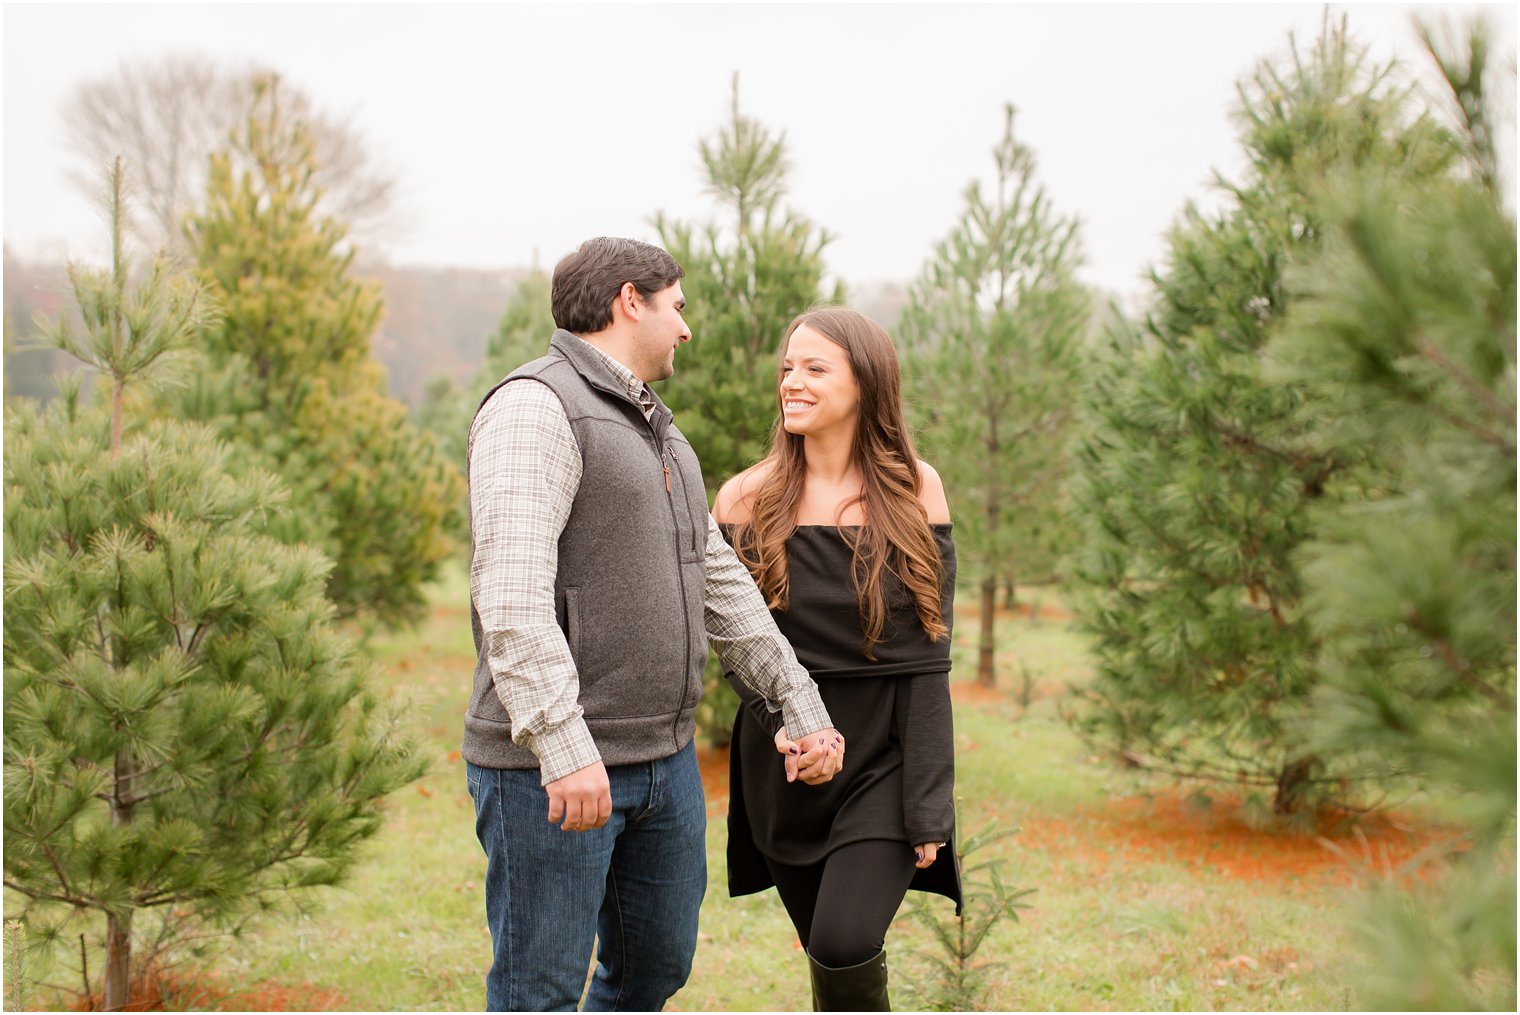 Engagement photo posing ideas for a Christmas tree farm engagement session